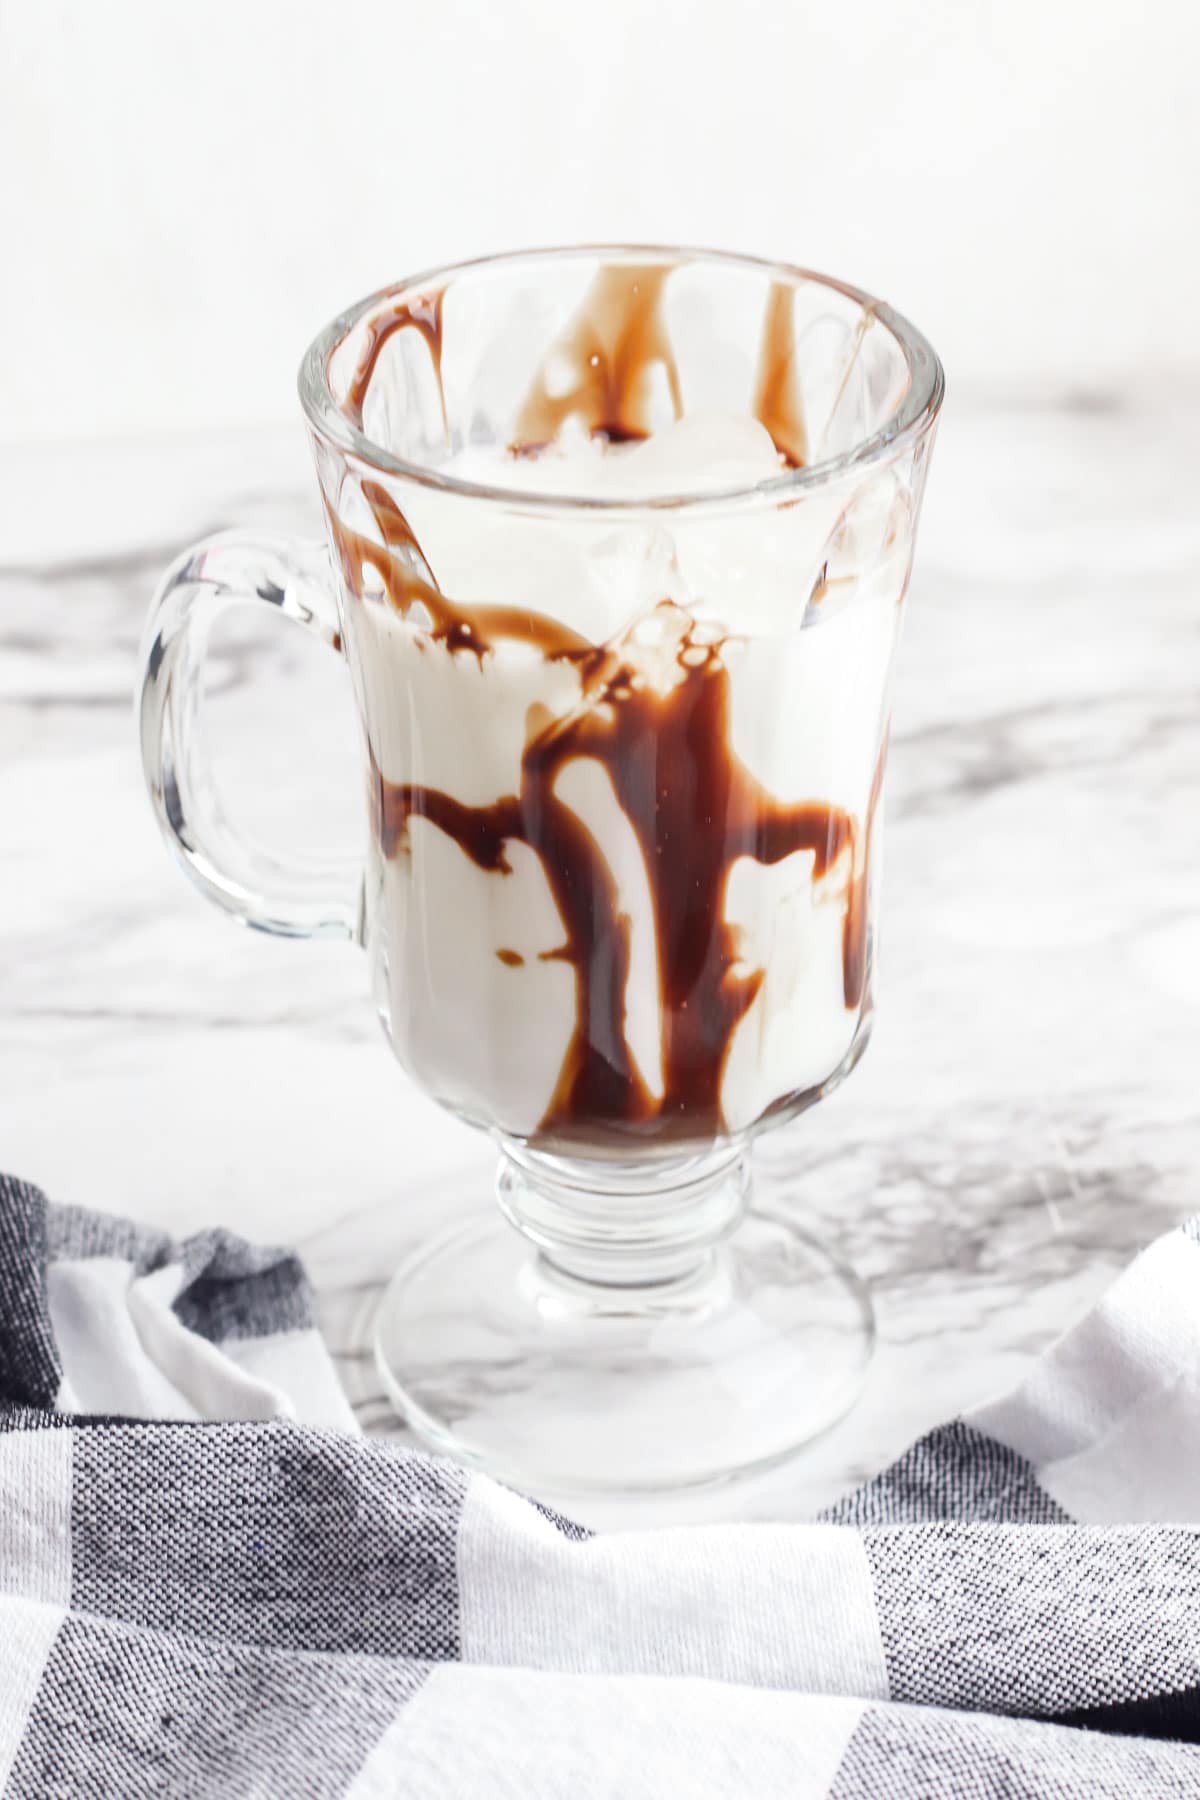 stemmed glass with a handle with milk and chocolate syrup